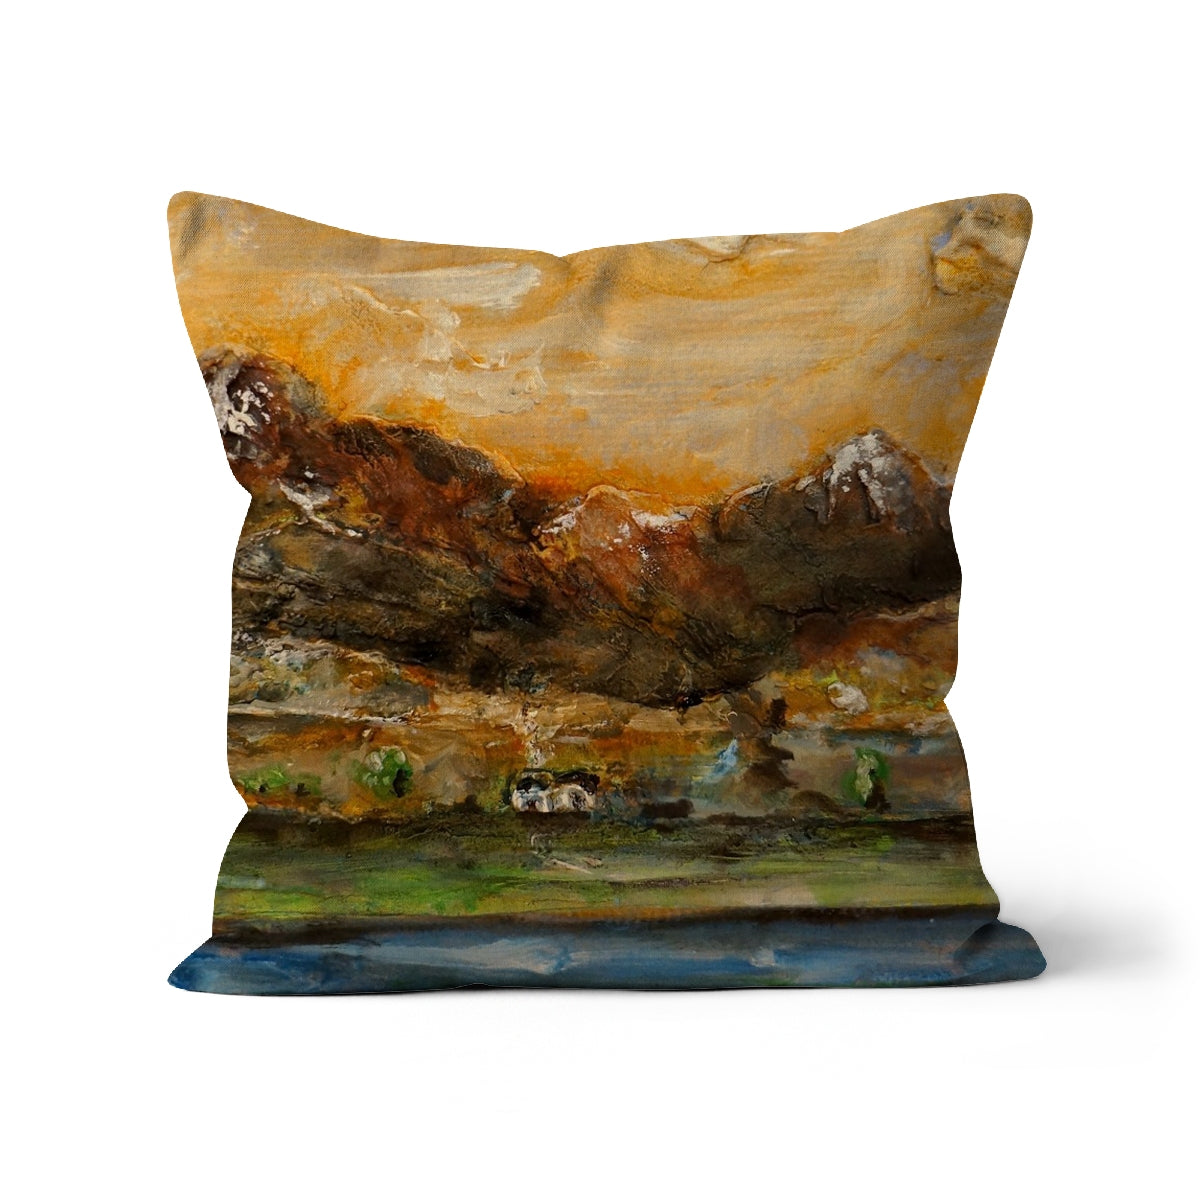 A Glencoe Cottage Art Gifts Cushion-Cushions-Glencoe Art Gallery-Linen-16"x16"-Paintings, Prints, Homeware, Art Gifts From Scotland By Scottish Artist Kevin Hunter